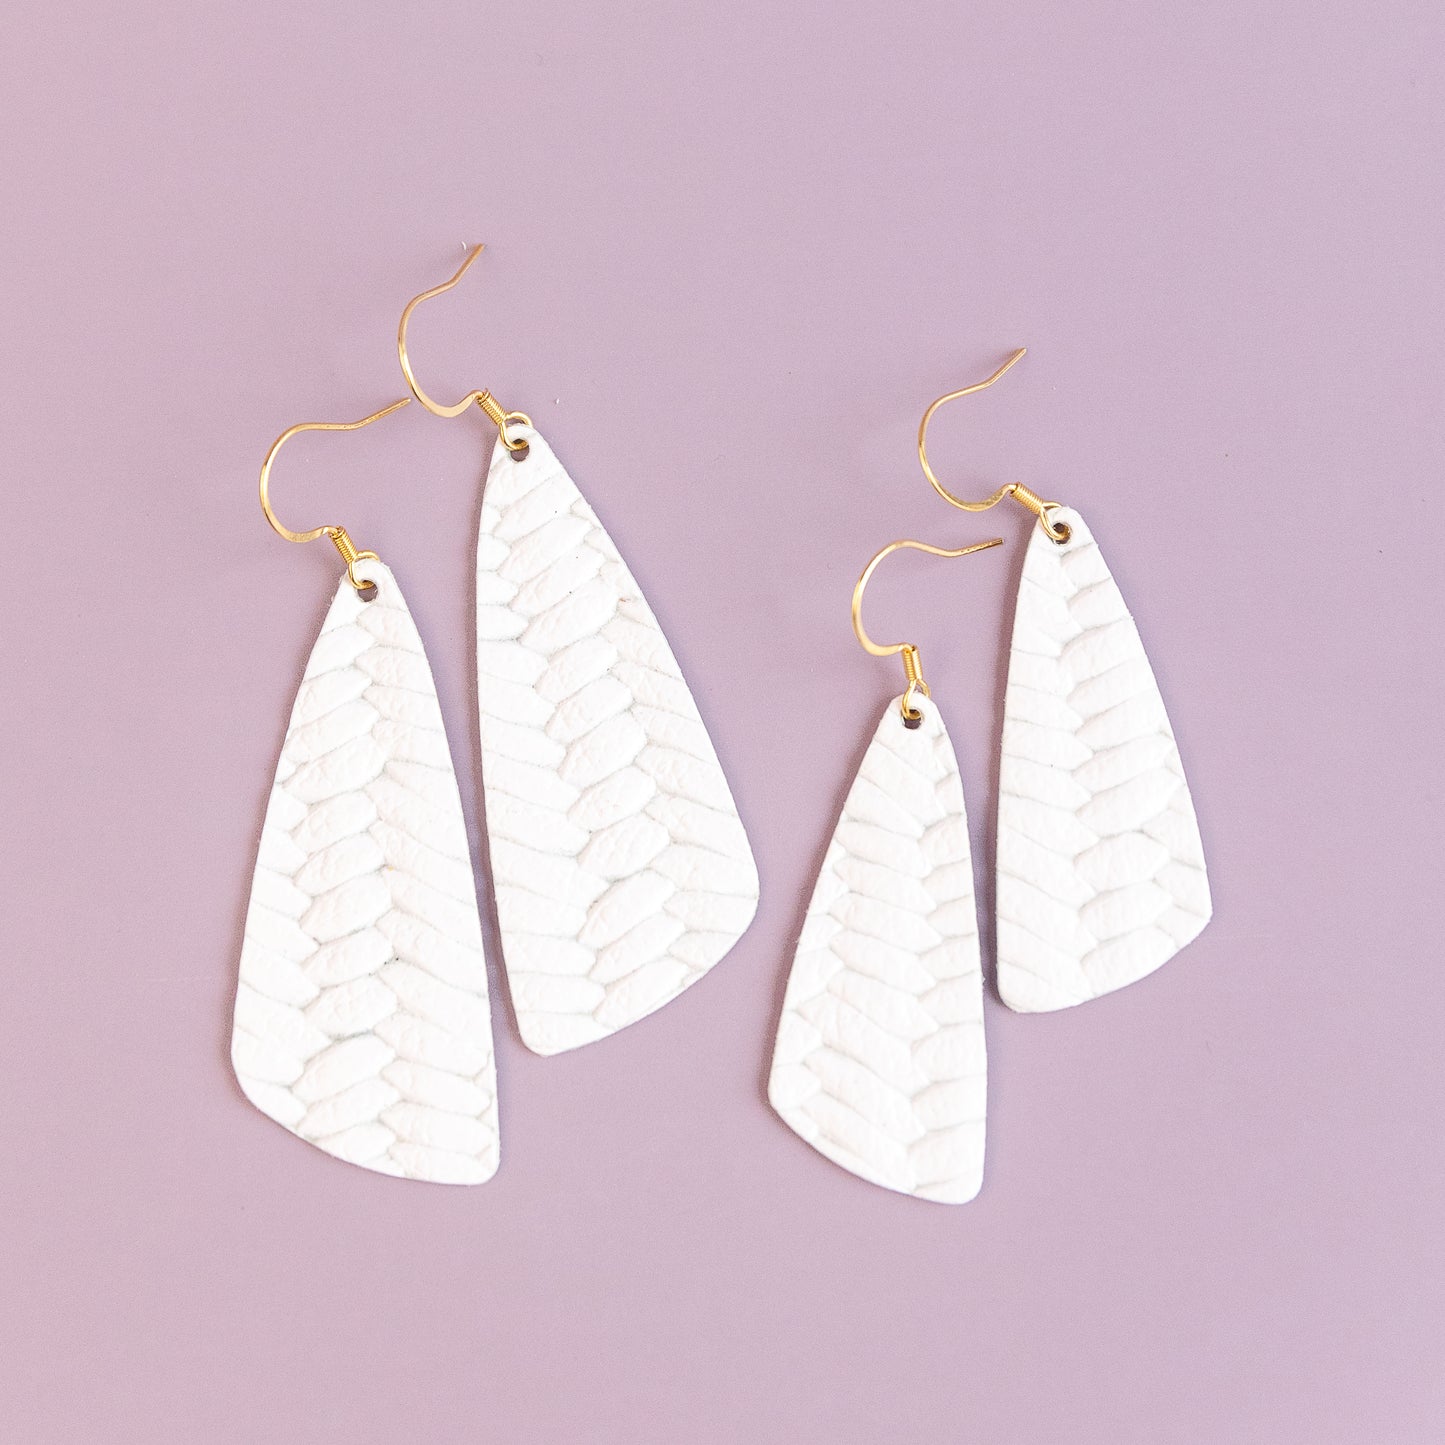 THE BRAIDED WEDGE in White/ Lightweight Leather Statement Earrings